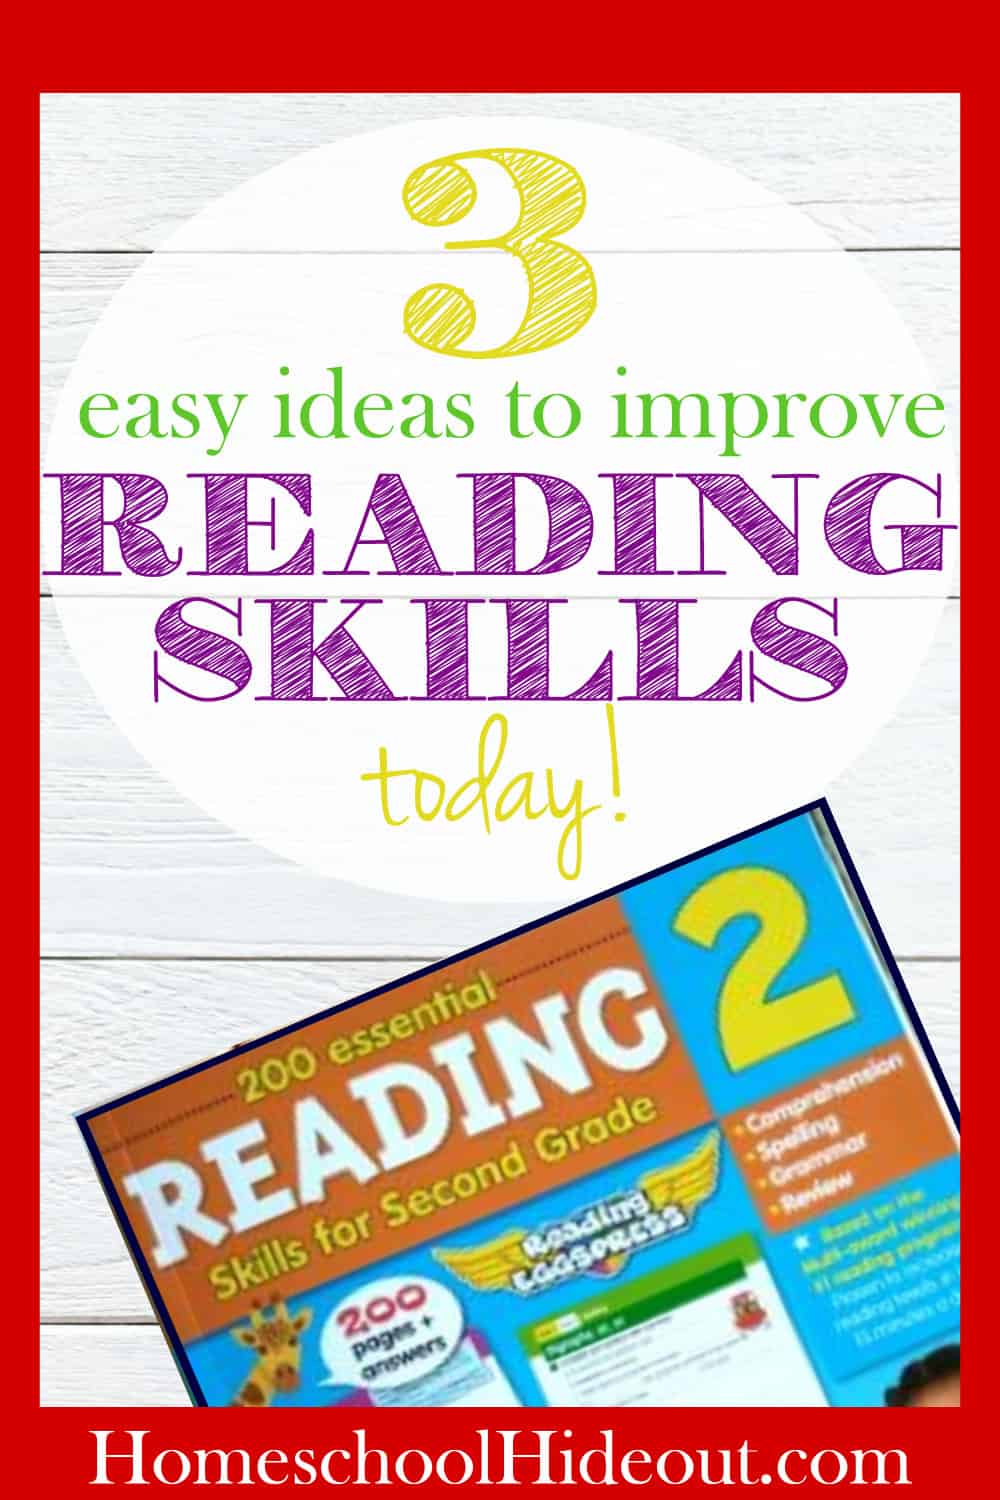 Take the struggle out of reading with these affordable and engaging workbooks. I was amazed at how quickly her reading skills improved! #reading #readingeggs #workbook #homeschooling #affordablehomeschooling #homeschoolonabudget #mathseeds